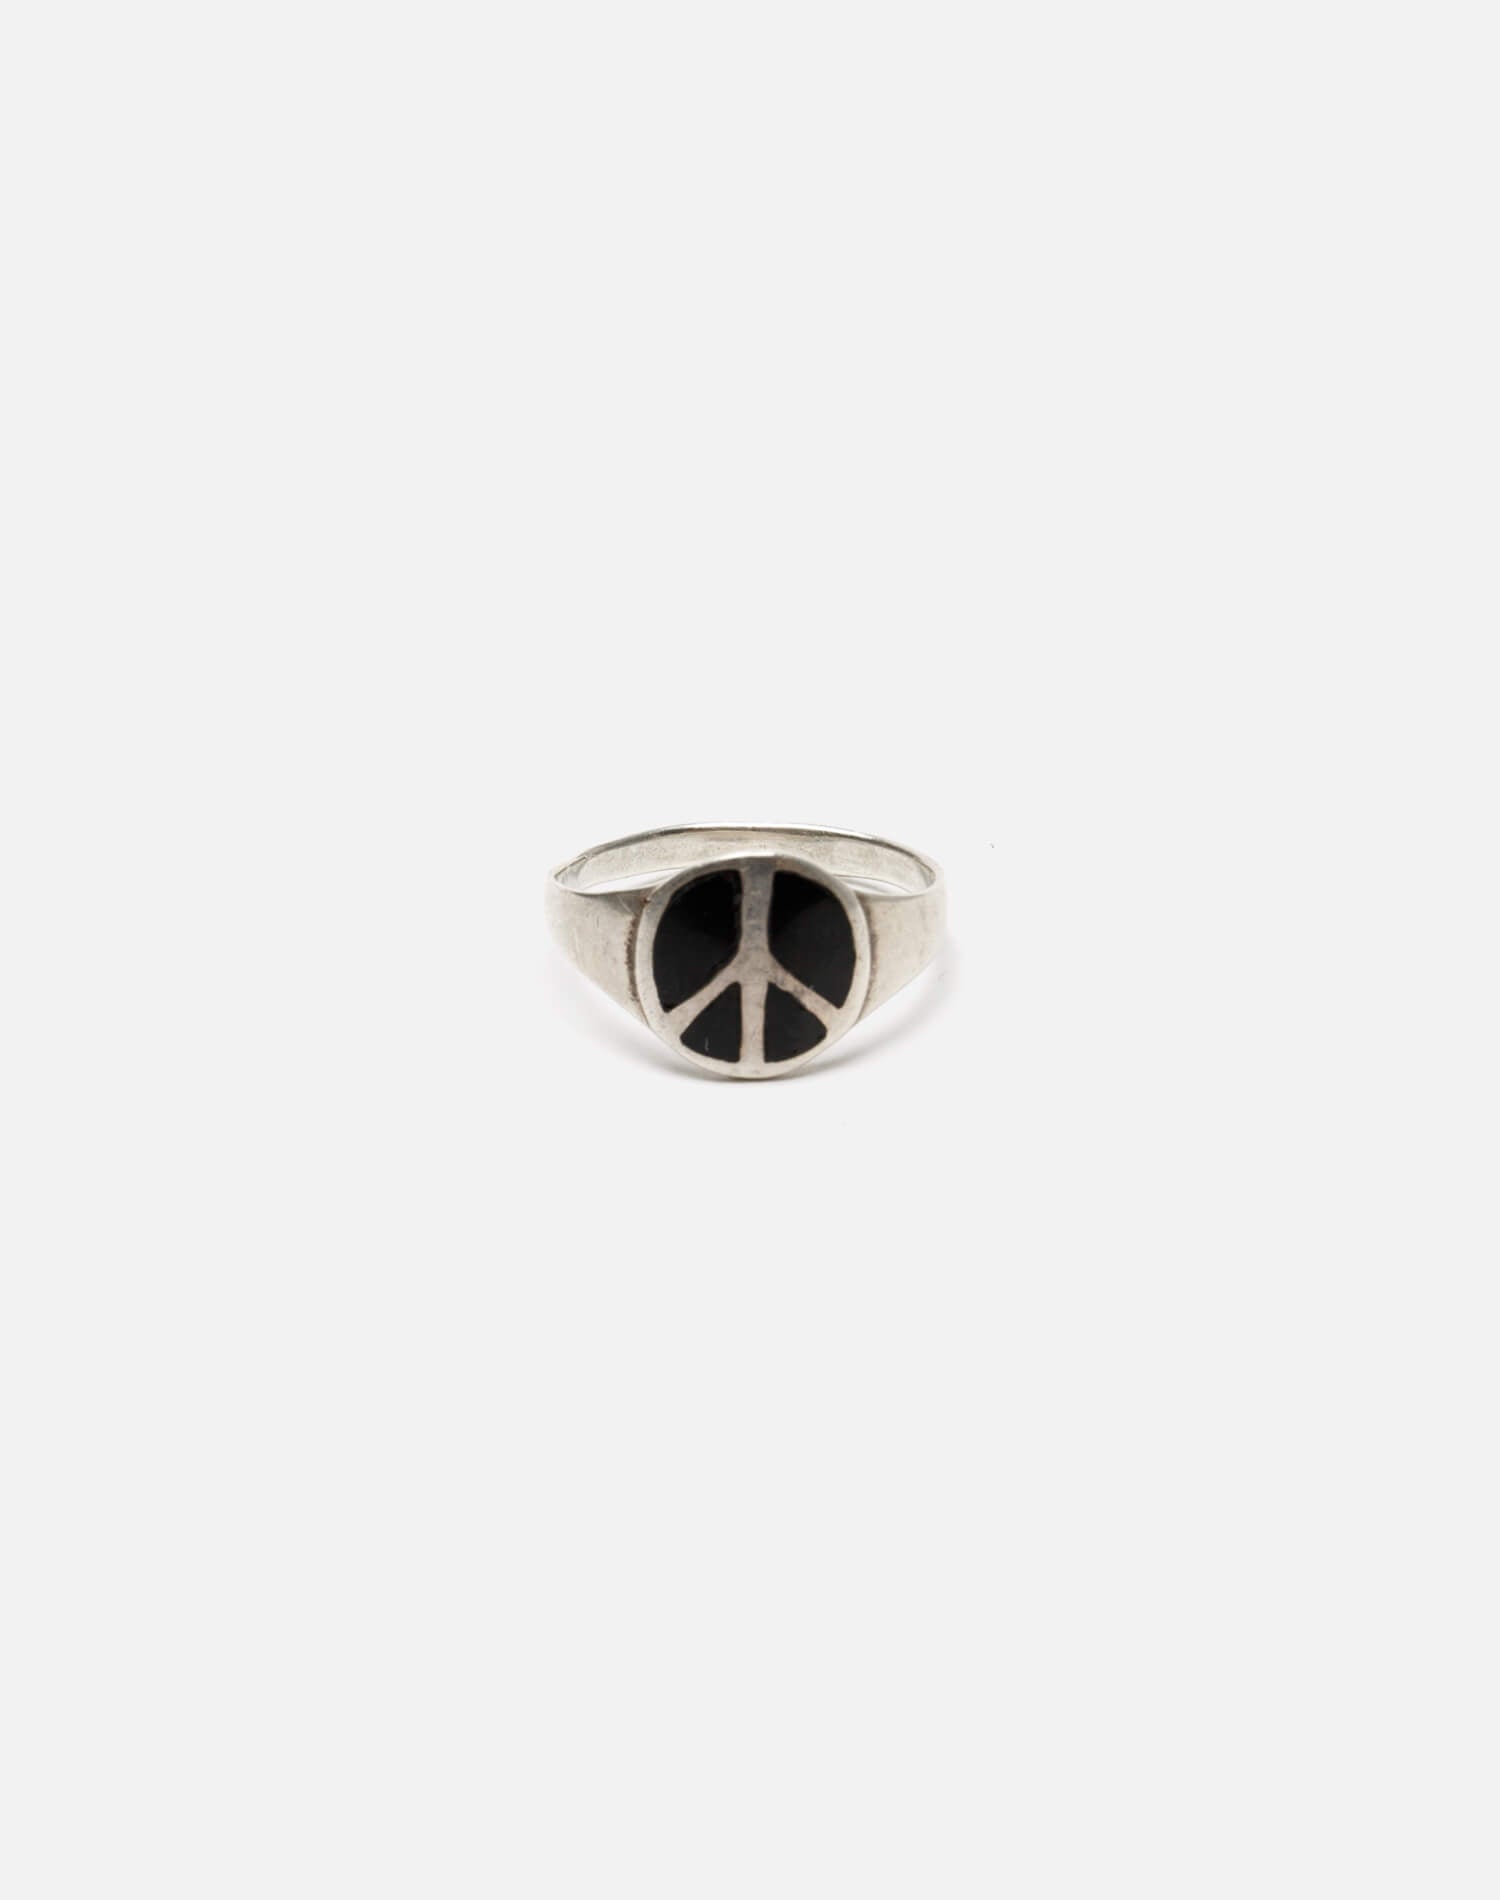 70s Inlaid Onyx Peace Mexican Sterling Silver Ring